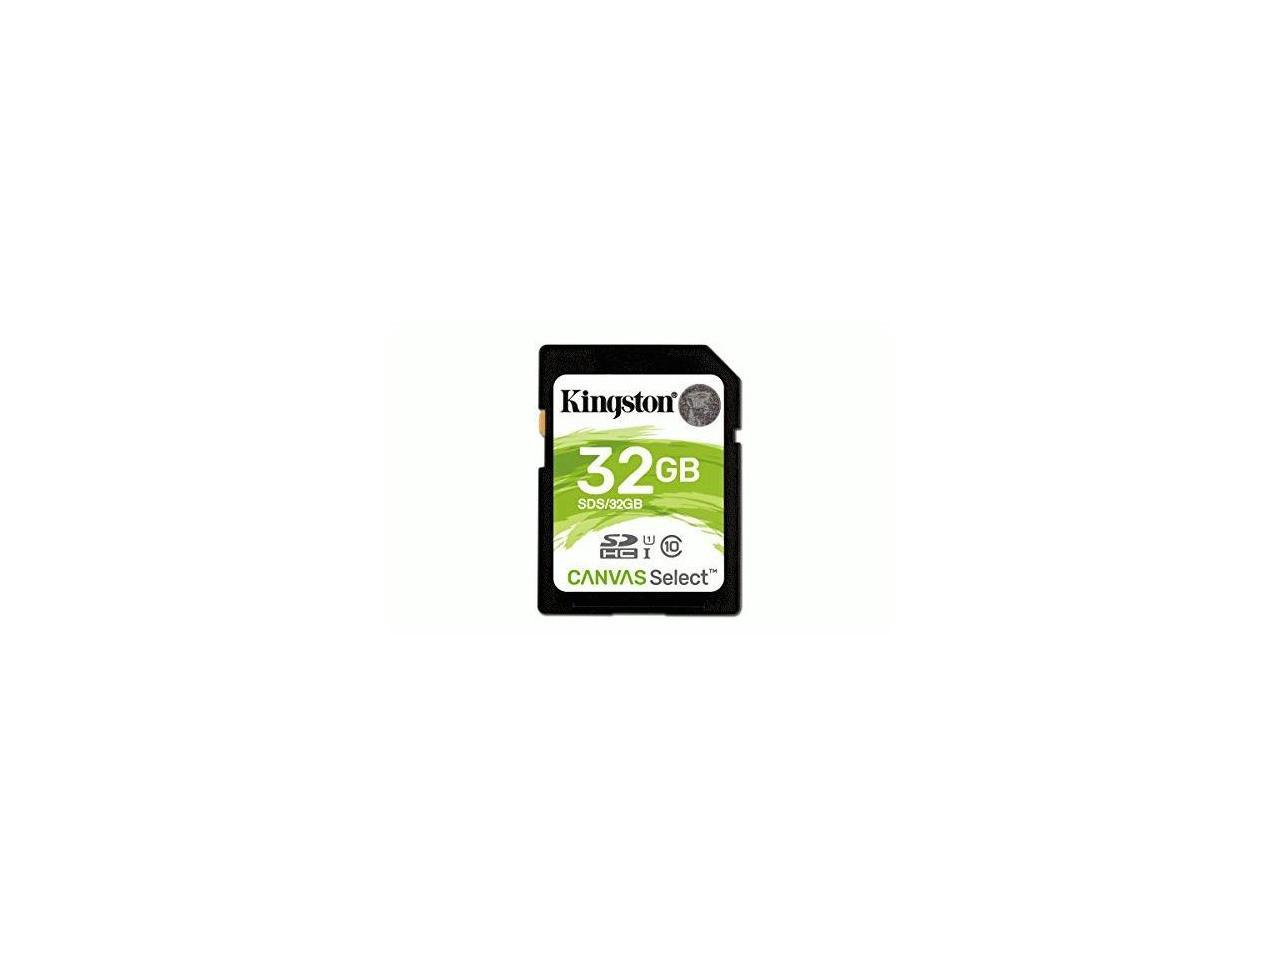 Kingston 32GB SDHC Canvas Select 80R CL10 UHS-I